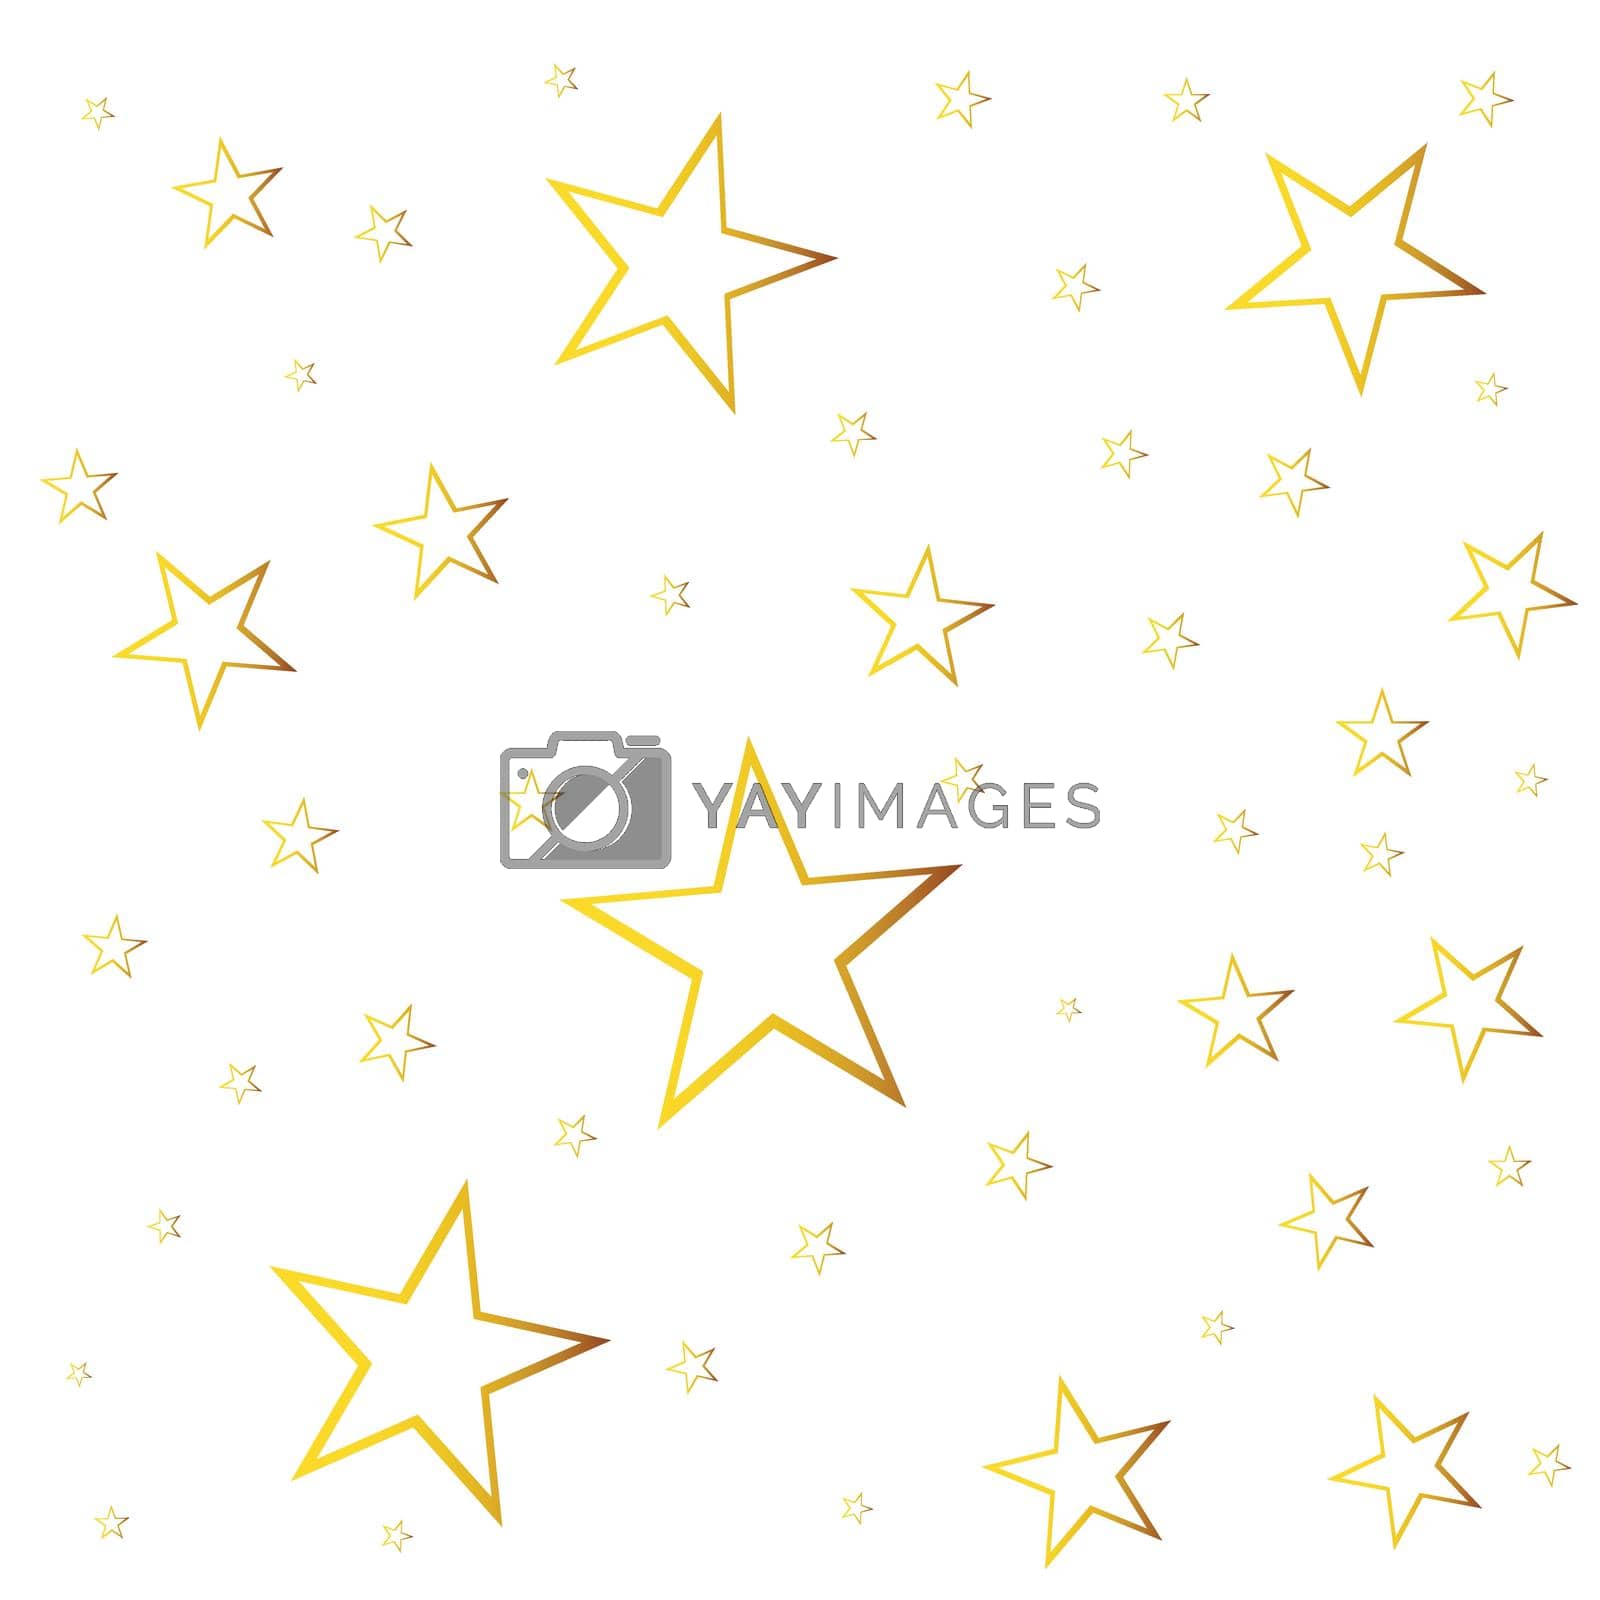 Royalty free image of Abstract falling star vector. Illustration with golden christmas stars on white background by LysenkoA